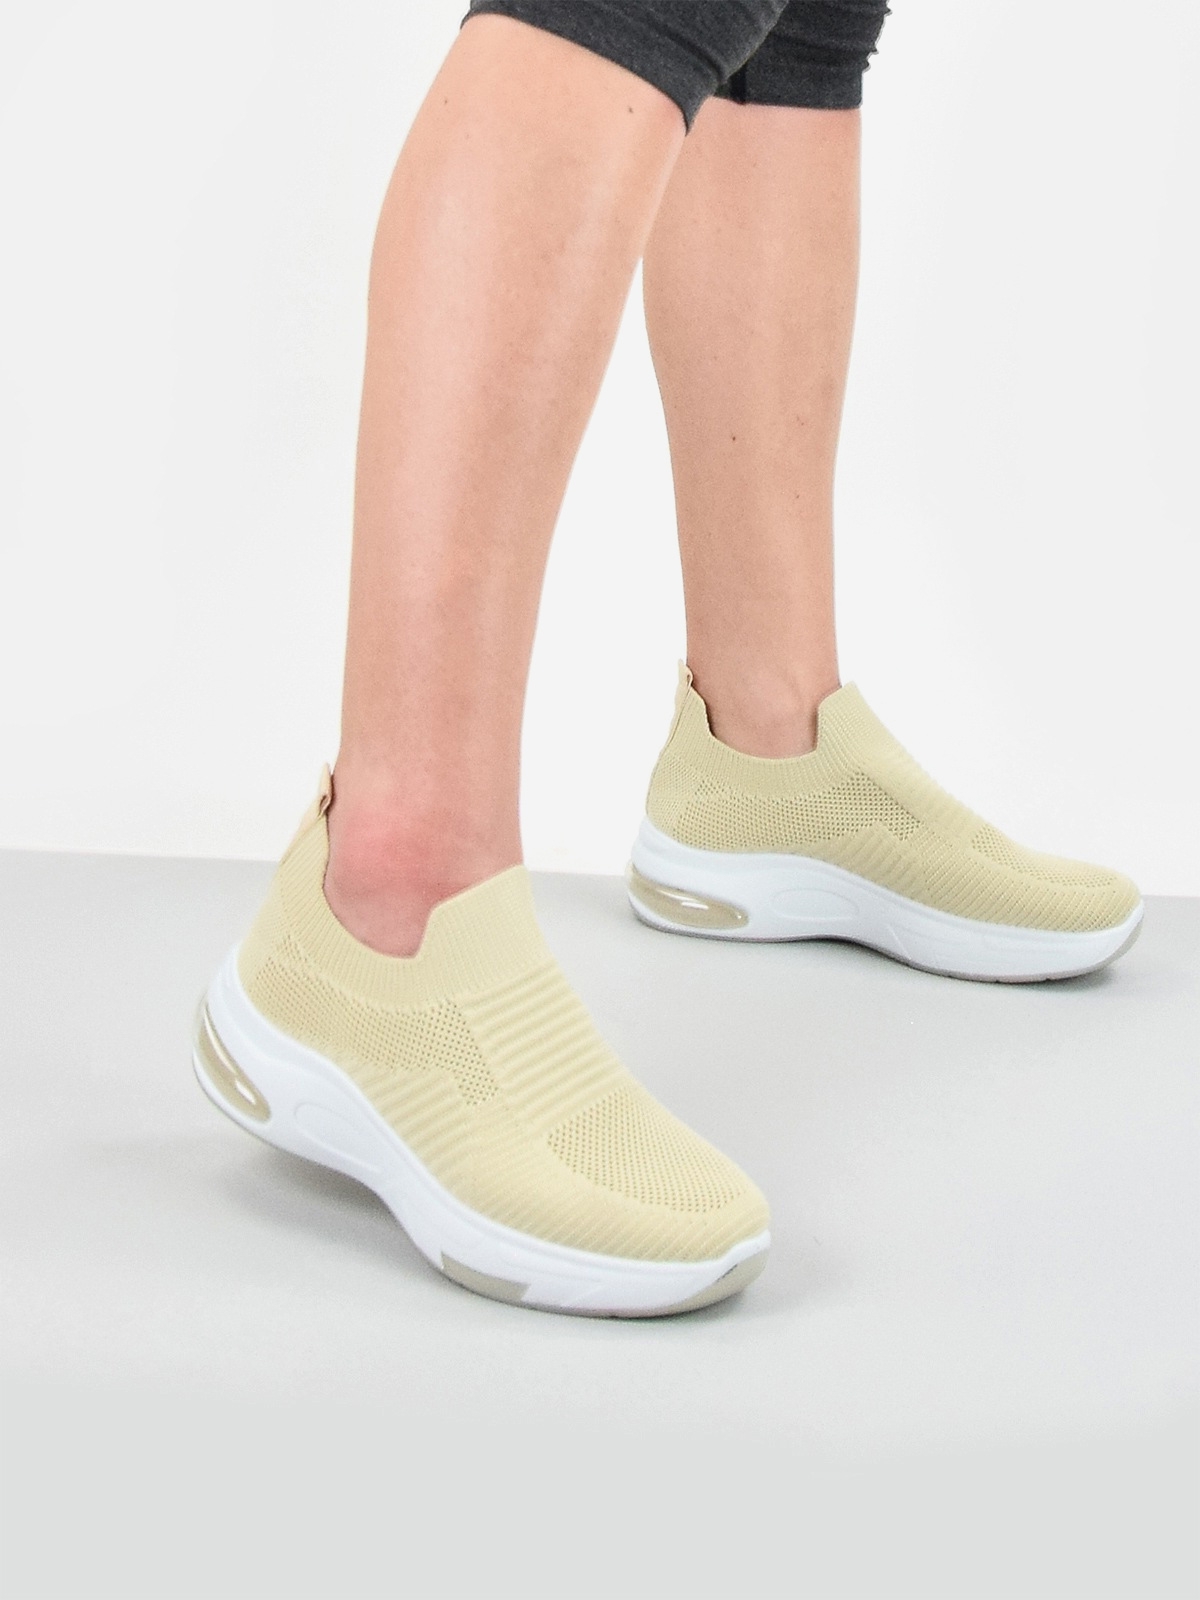 Sock style trainers with white sole in neutral